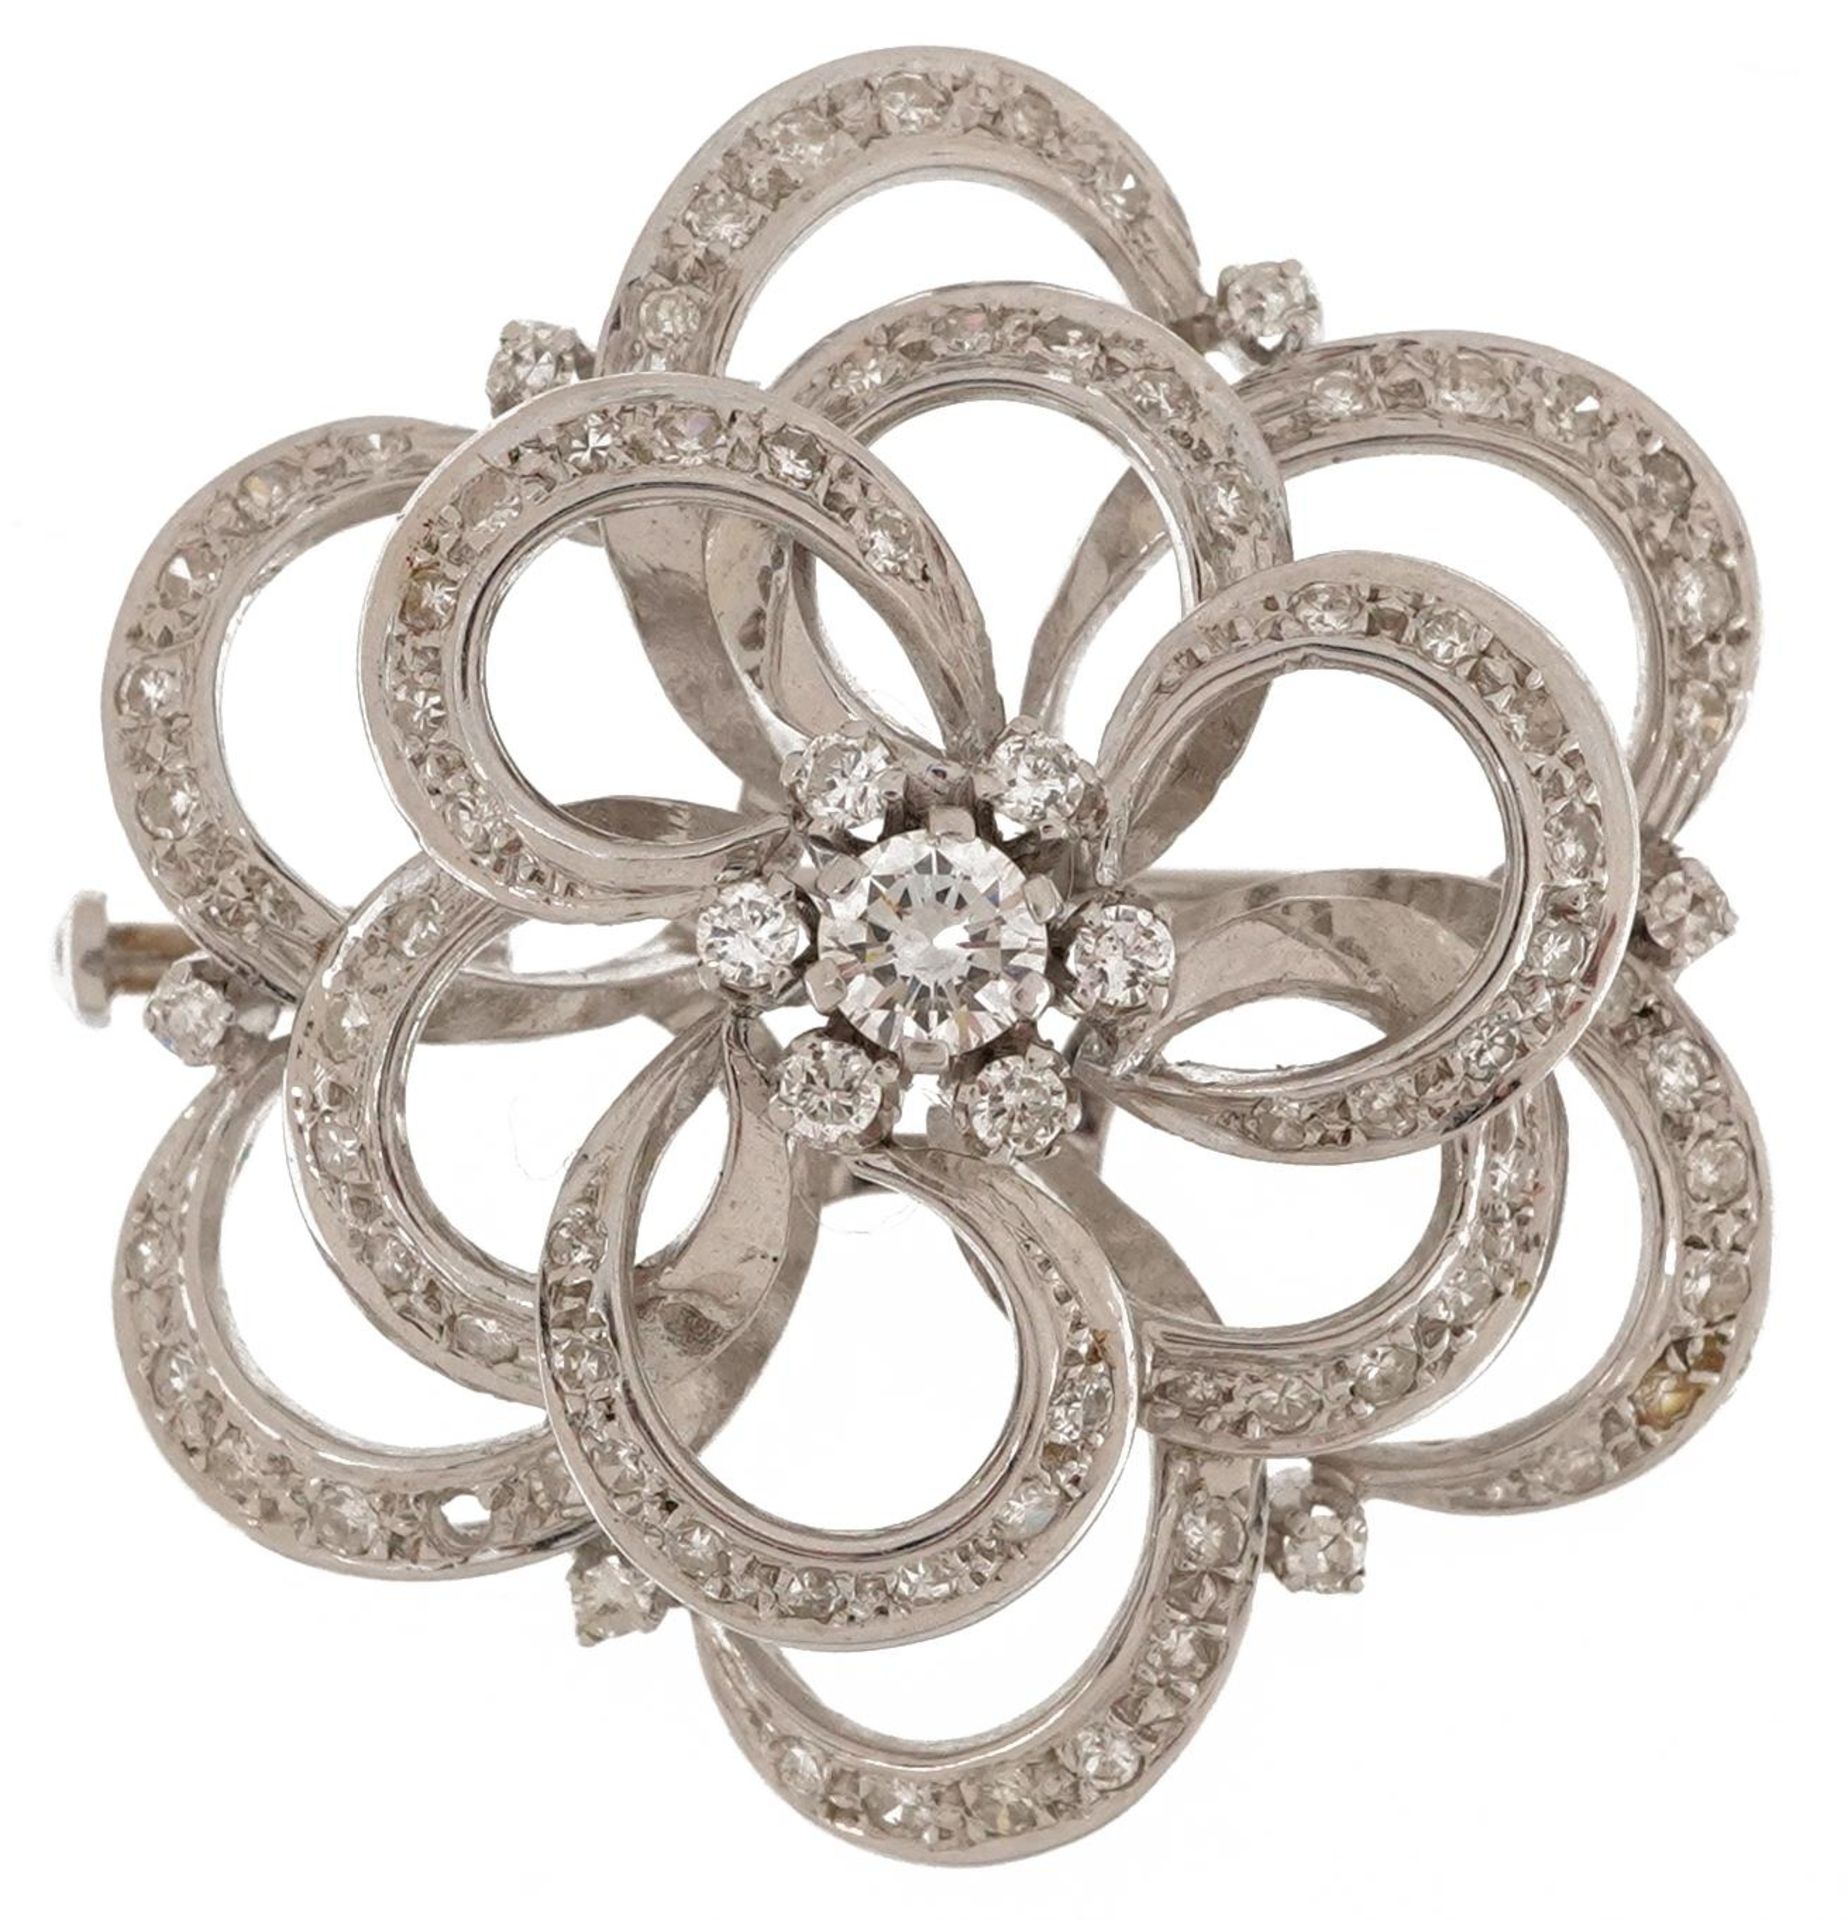 18ct white gold diamond four tier open flower head brooch, the central diamond approximately 0.25ct,